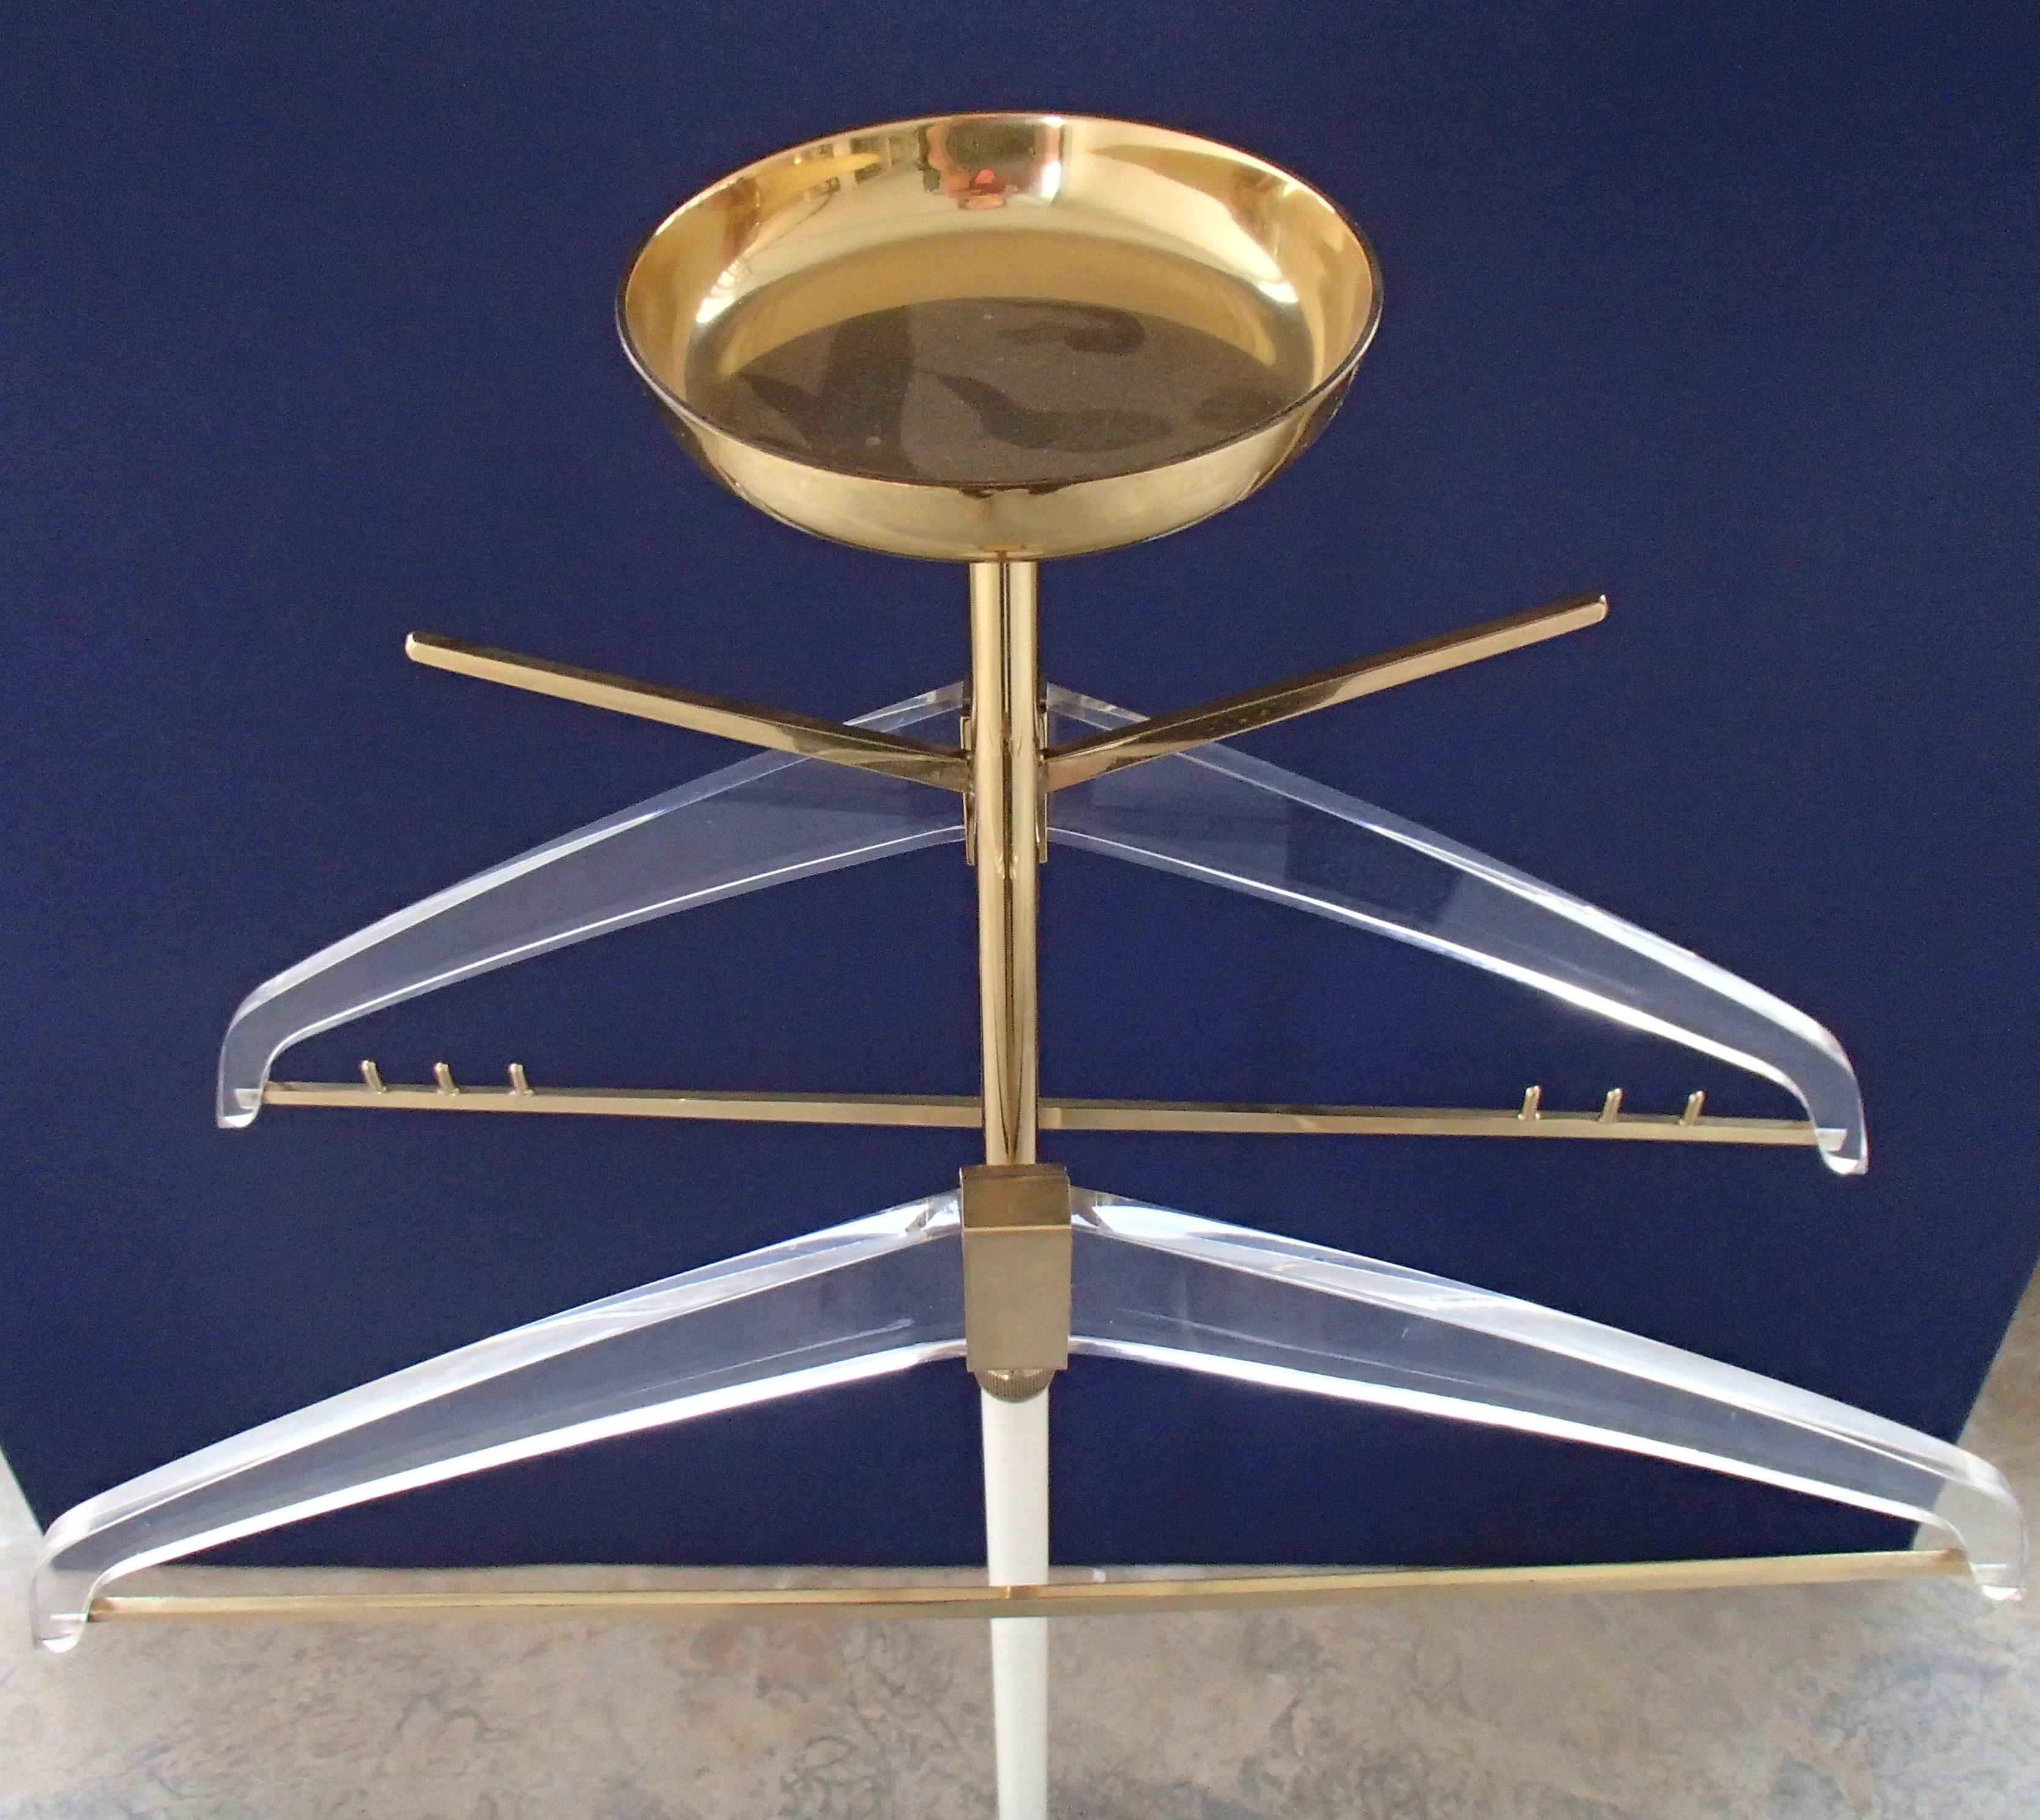 Midcentury plexi & brass rack for coasts, trousers, ties, belts and cufflinks.